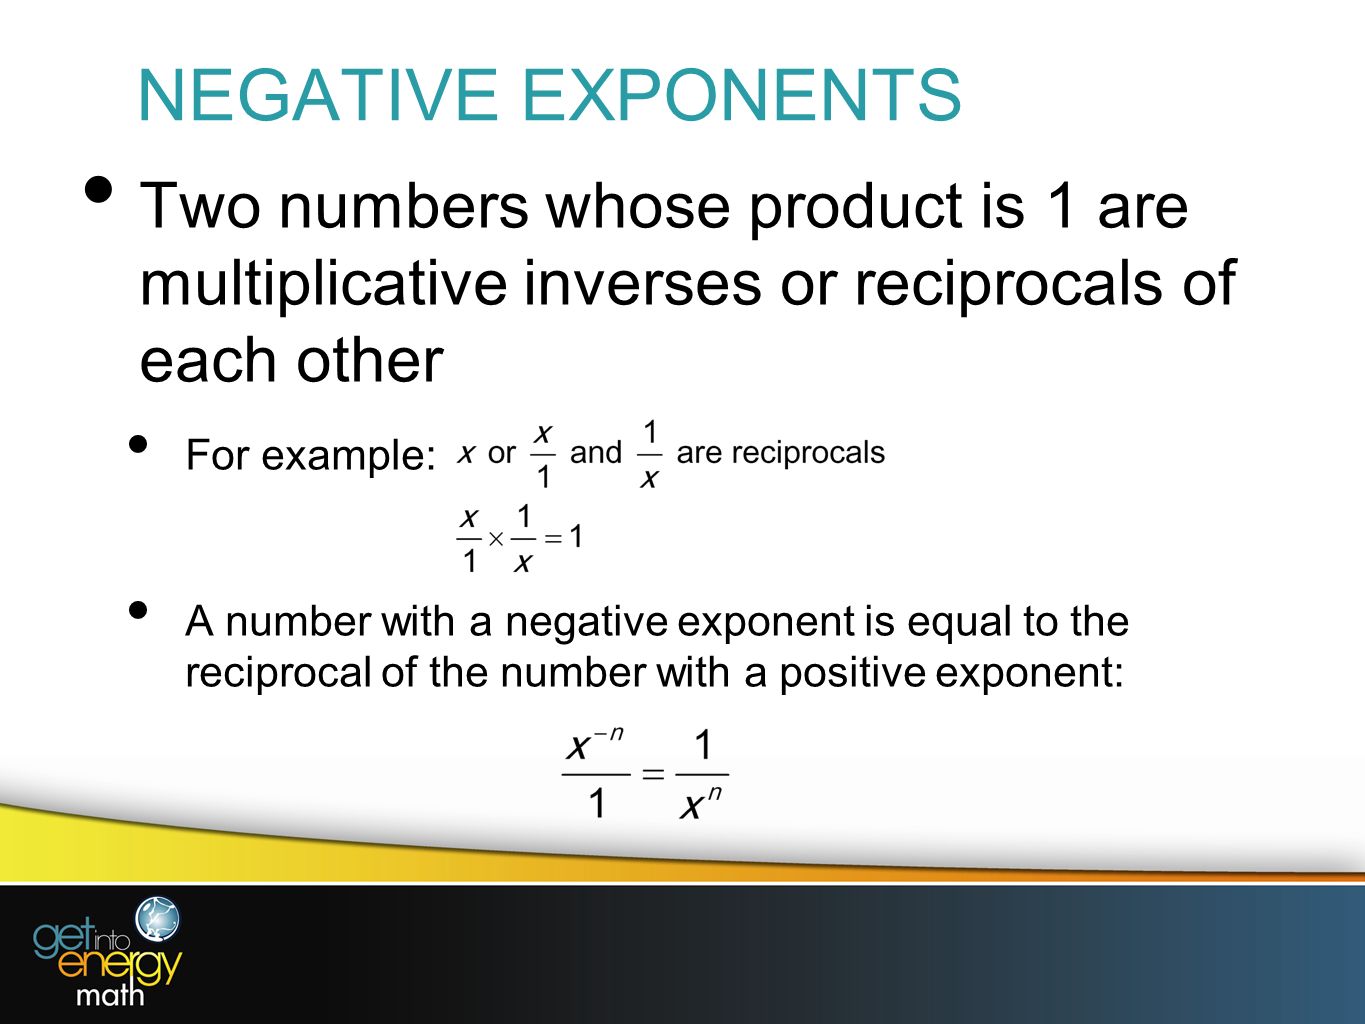 NEGATIVE EXPONENTS Two numbers whose product is 1 are multiplicative inverses or reciprocals of each other.